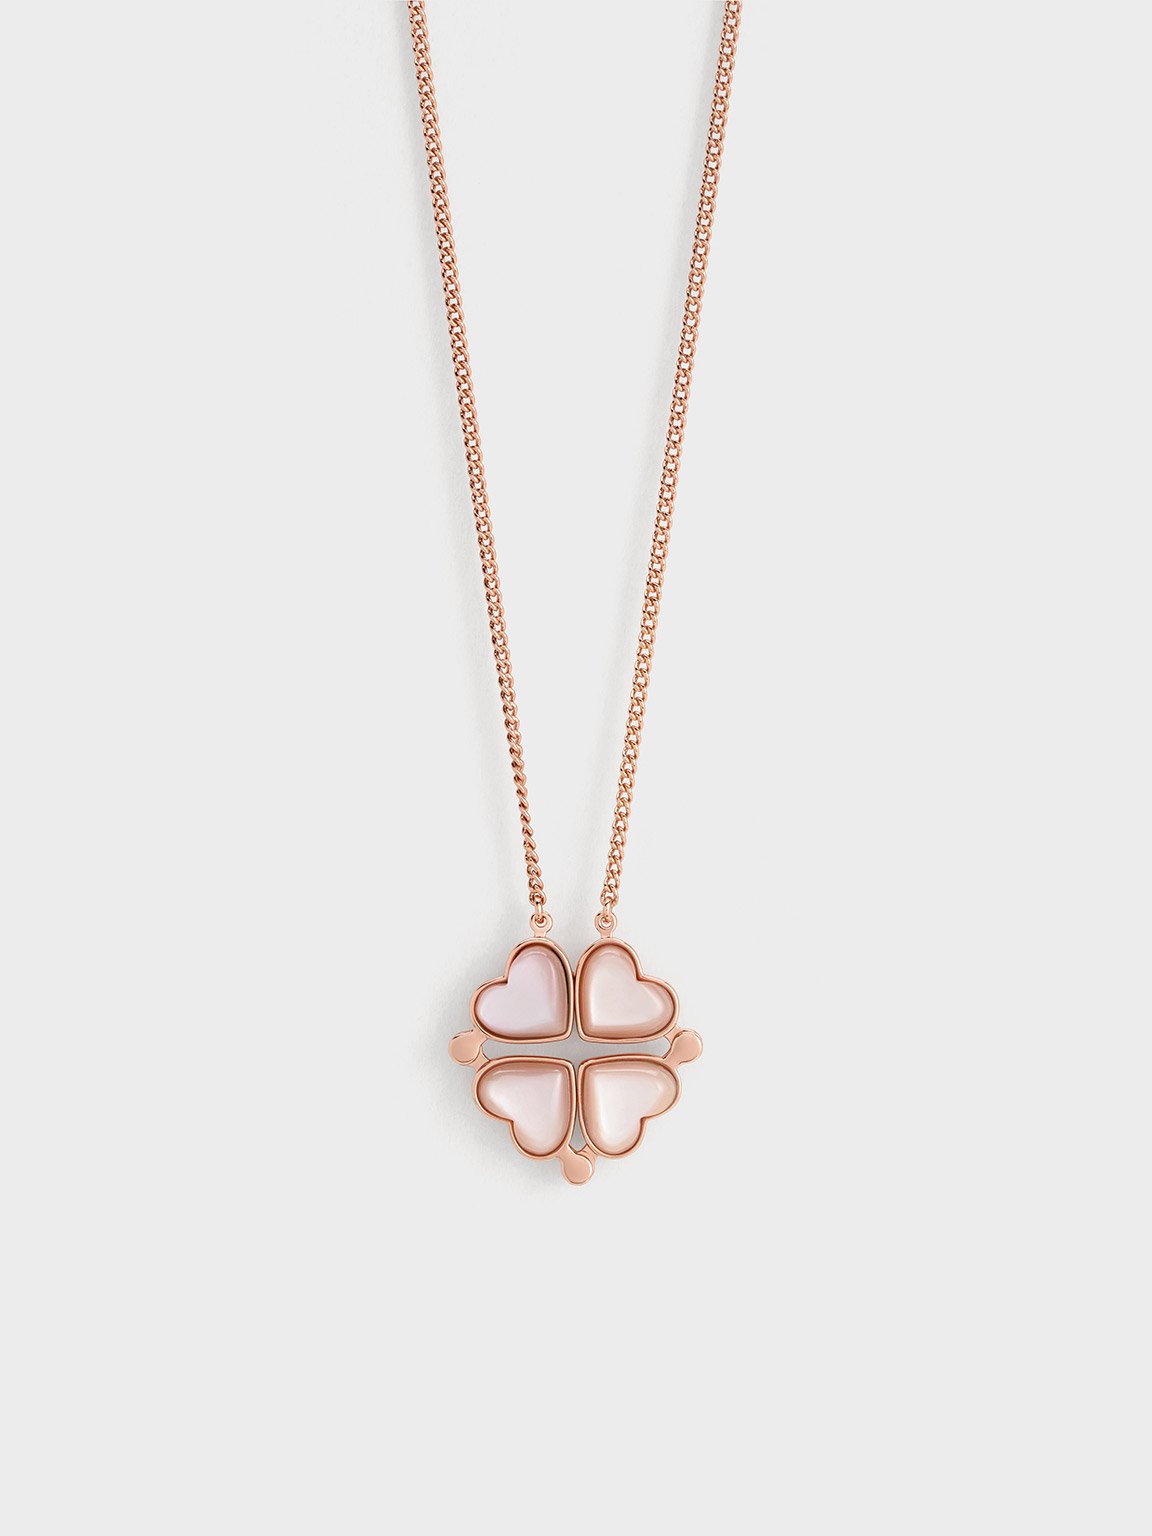 Charles & Keith - Women's Annalise Clover Heart Necklace, Rose Gold, R